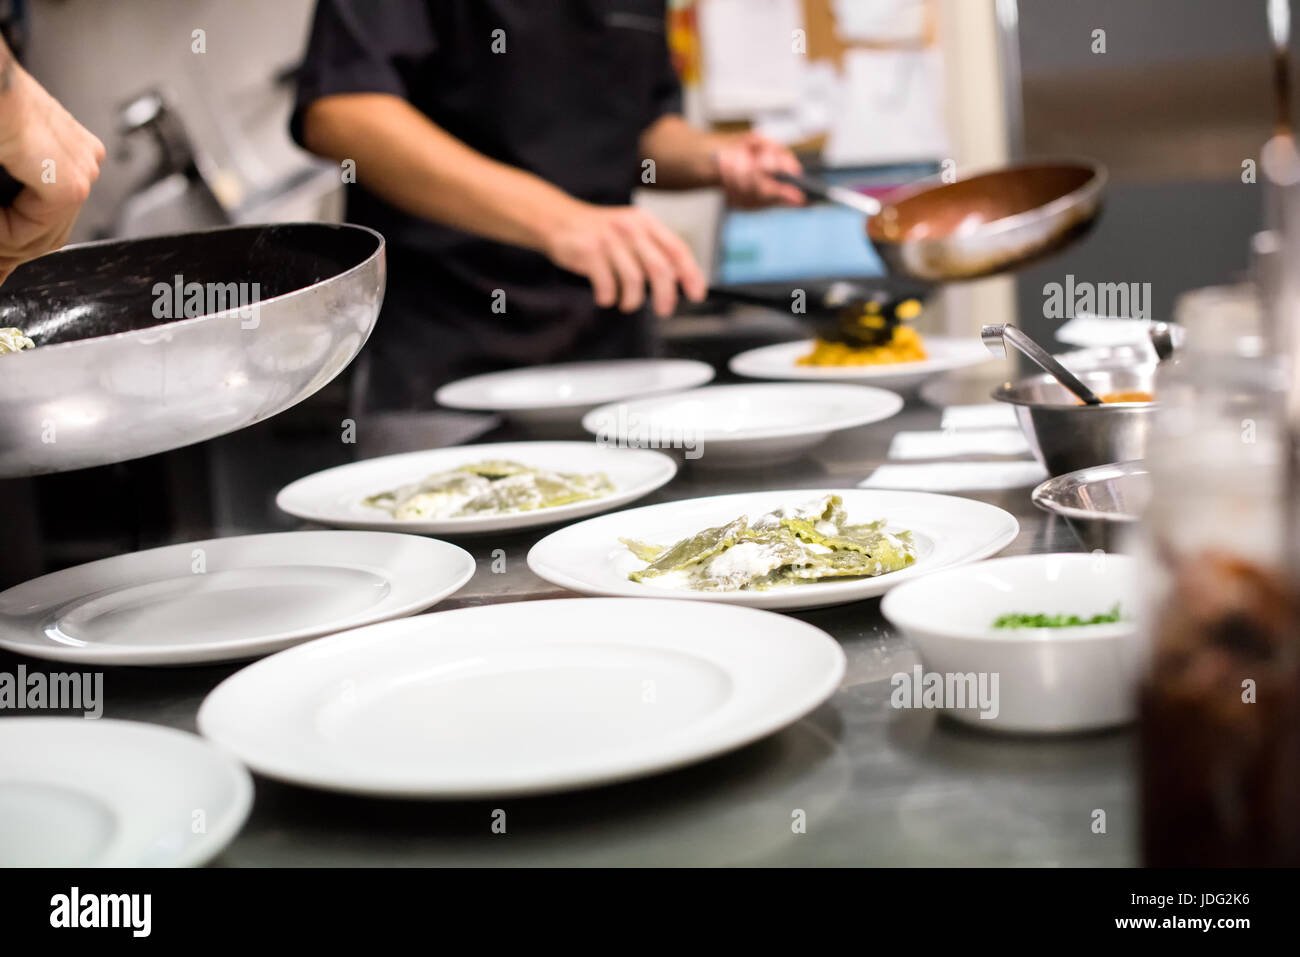 Restaurant kitchen with chefs preparing a meal serving food onto white  plates from saucepans in a low angle close up view Stock Photo - Alamy